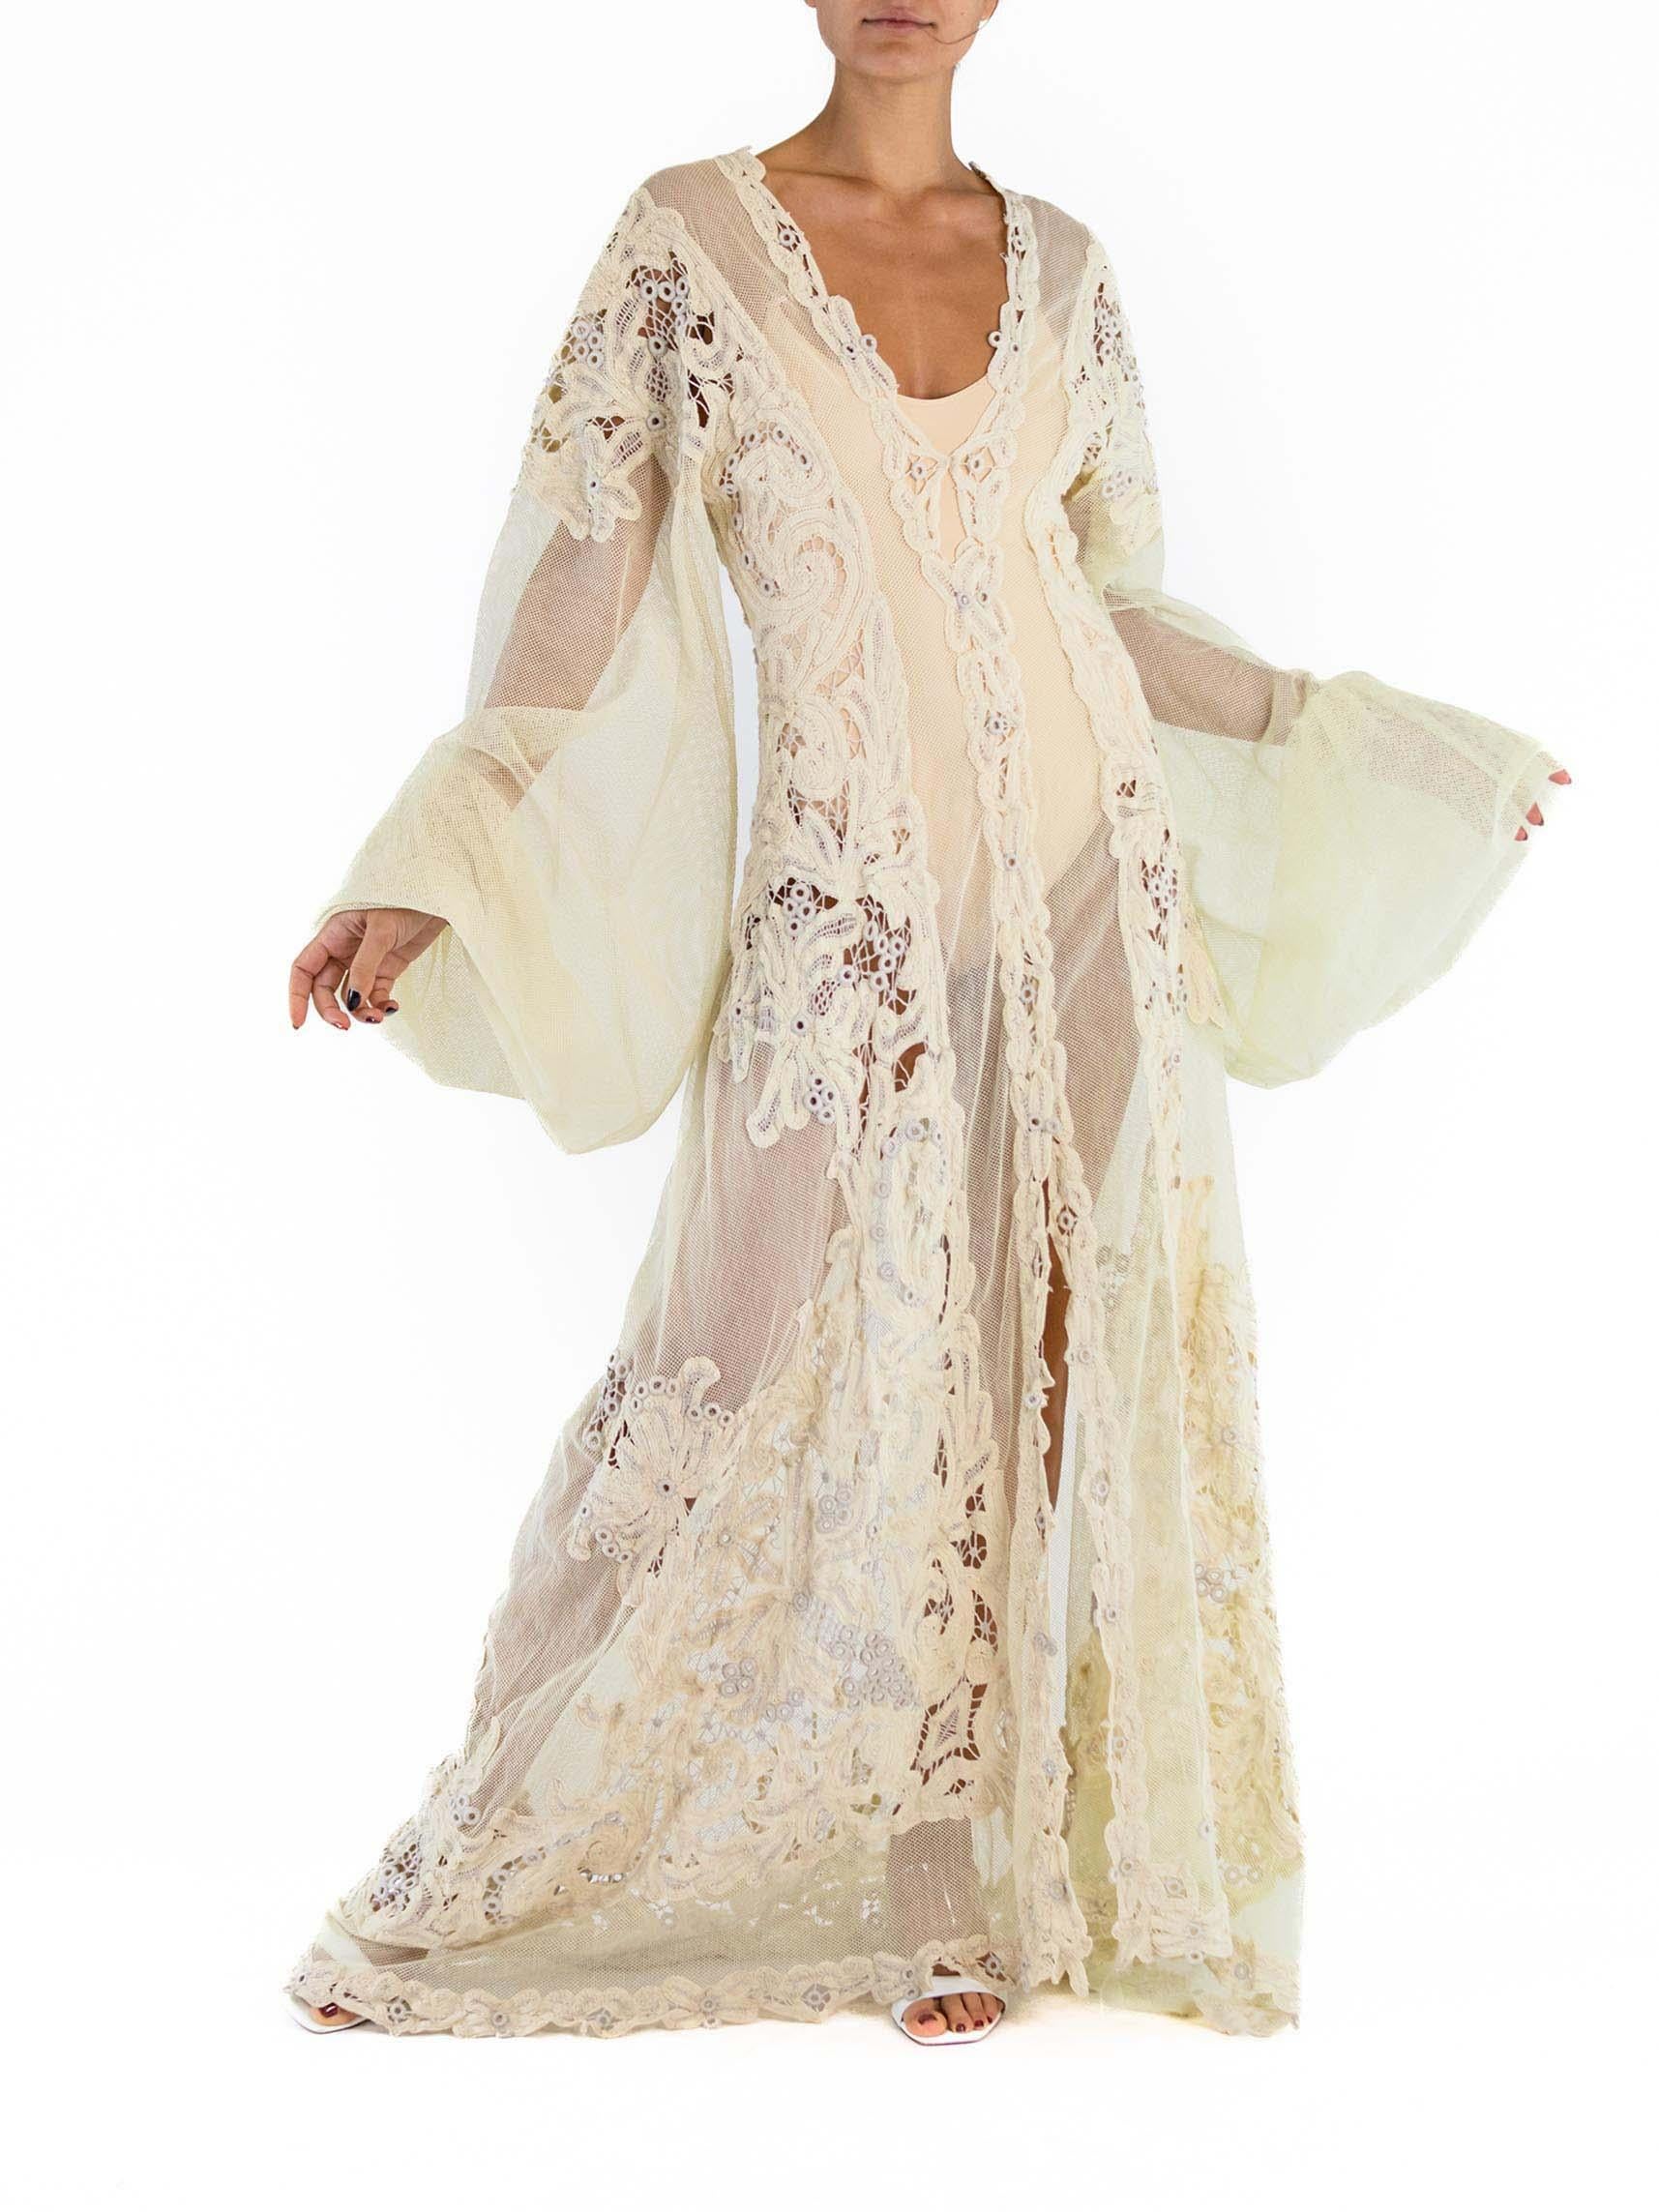 MORPHEW ATELIER Cream Cotton Net & Handmade Victorian Tape Lace Gown With Giant For Sale 4